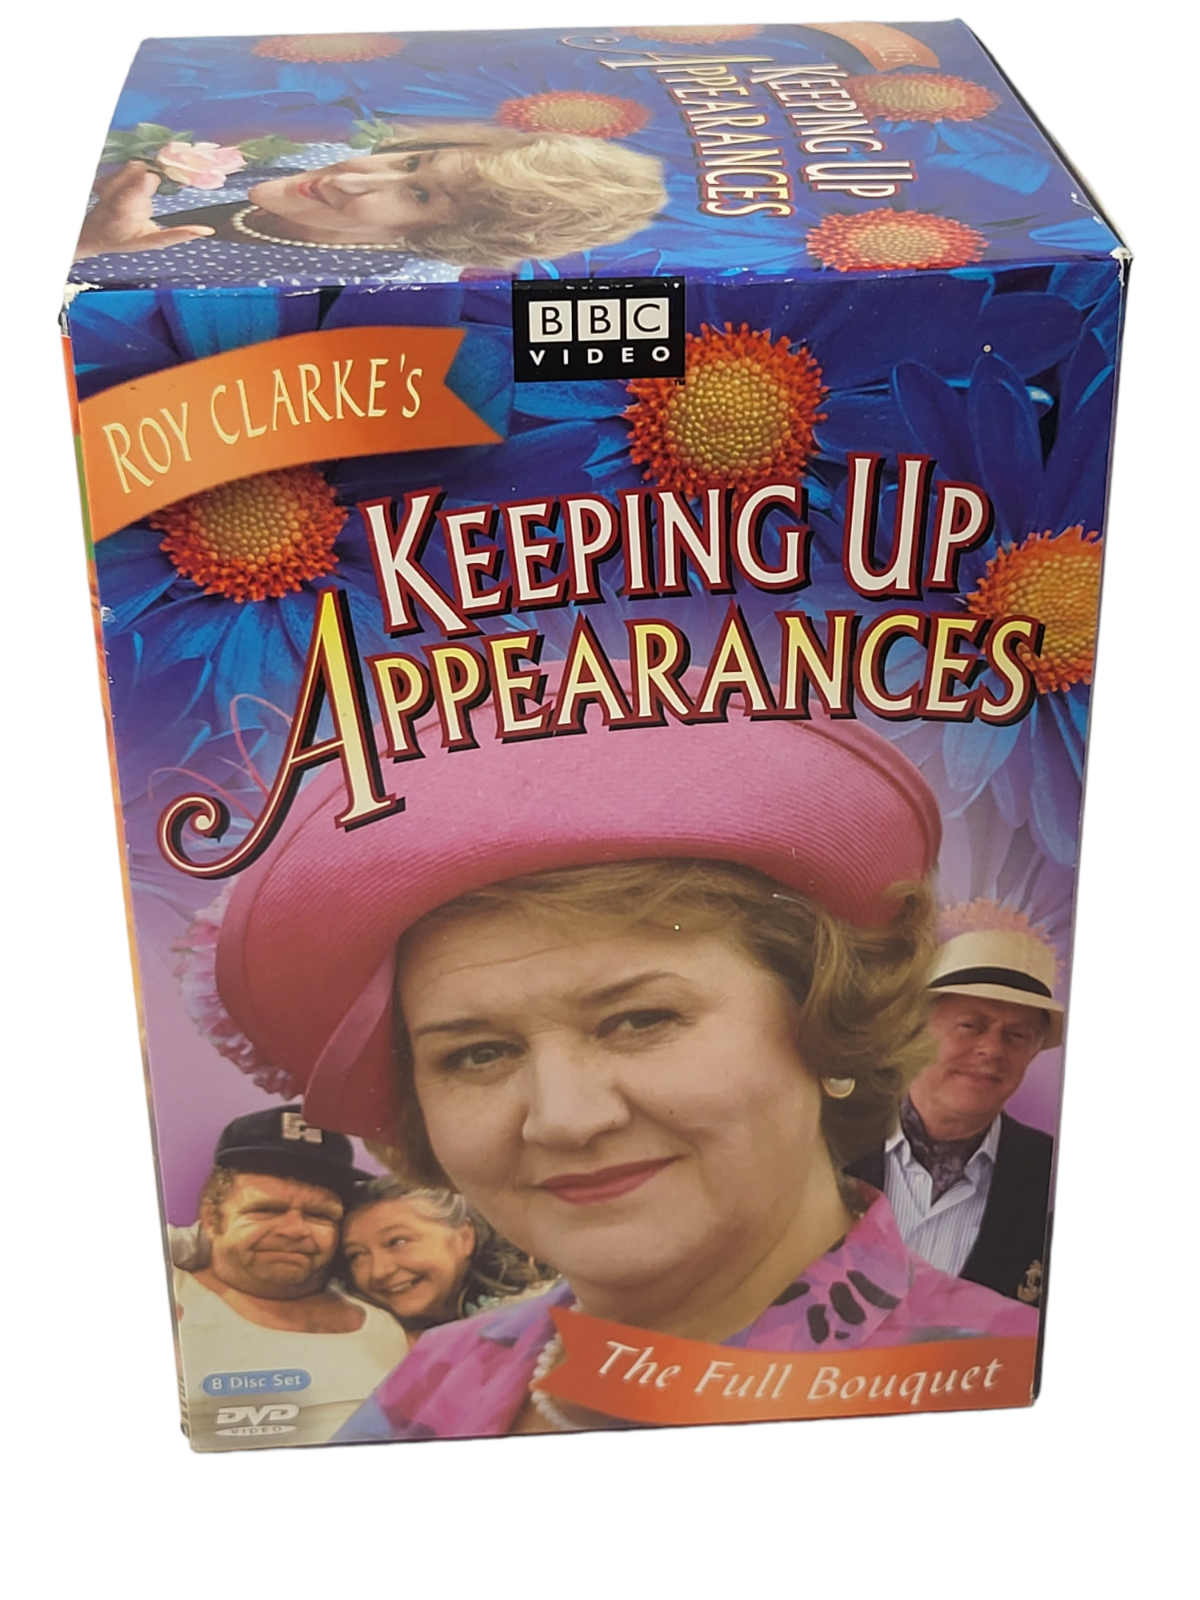 Primary image for Roy Clarke's Keeping Up Appearances The Full Bouquet  DVD set  2004 WB BBC